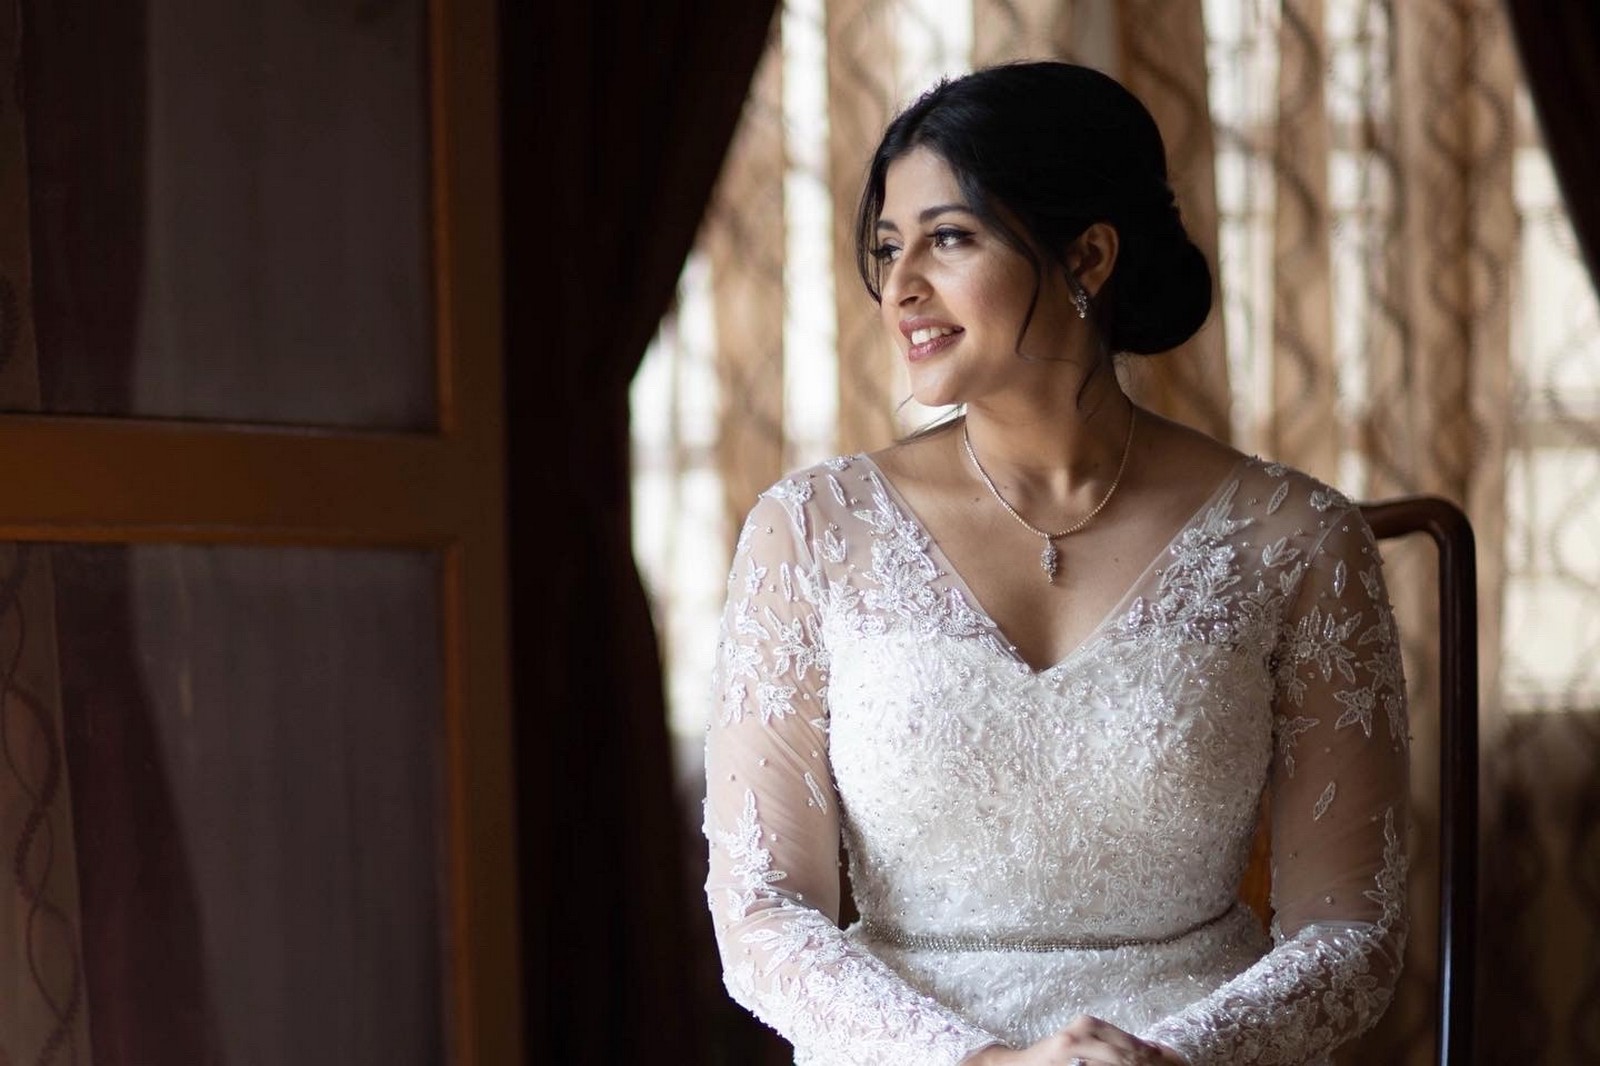 20+ Christian Brides Who Donned The Most Breathtaking Sarees! | WedMeGood